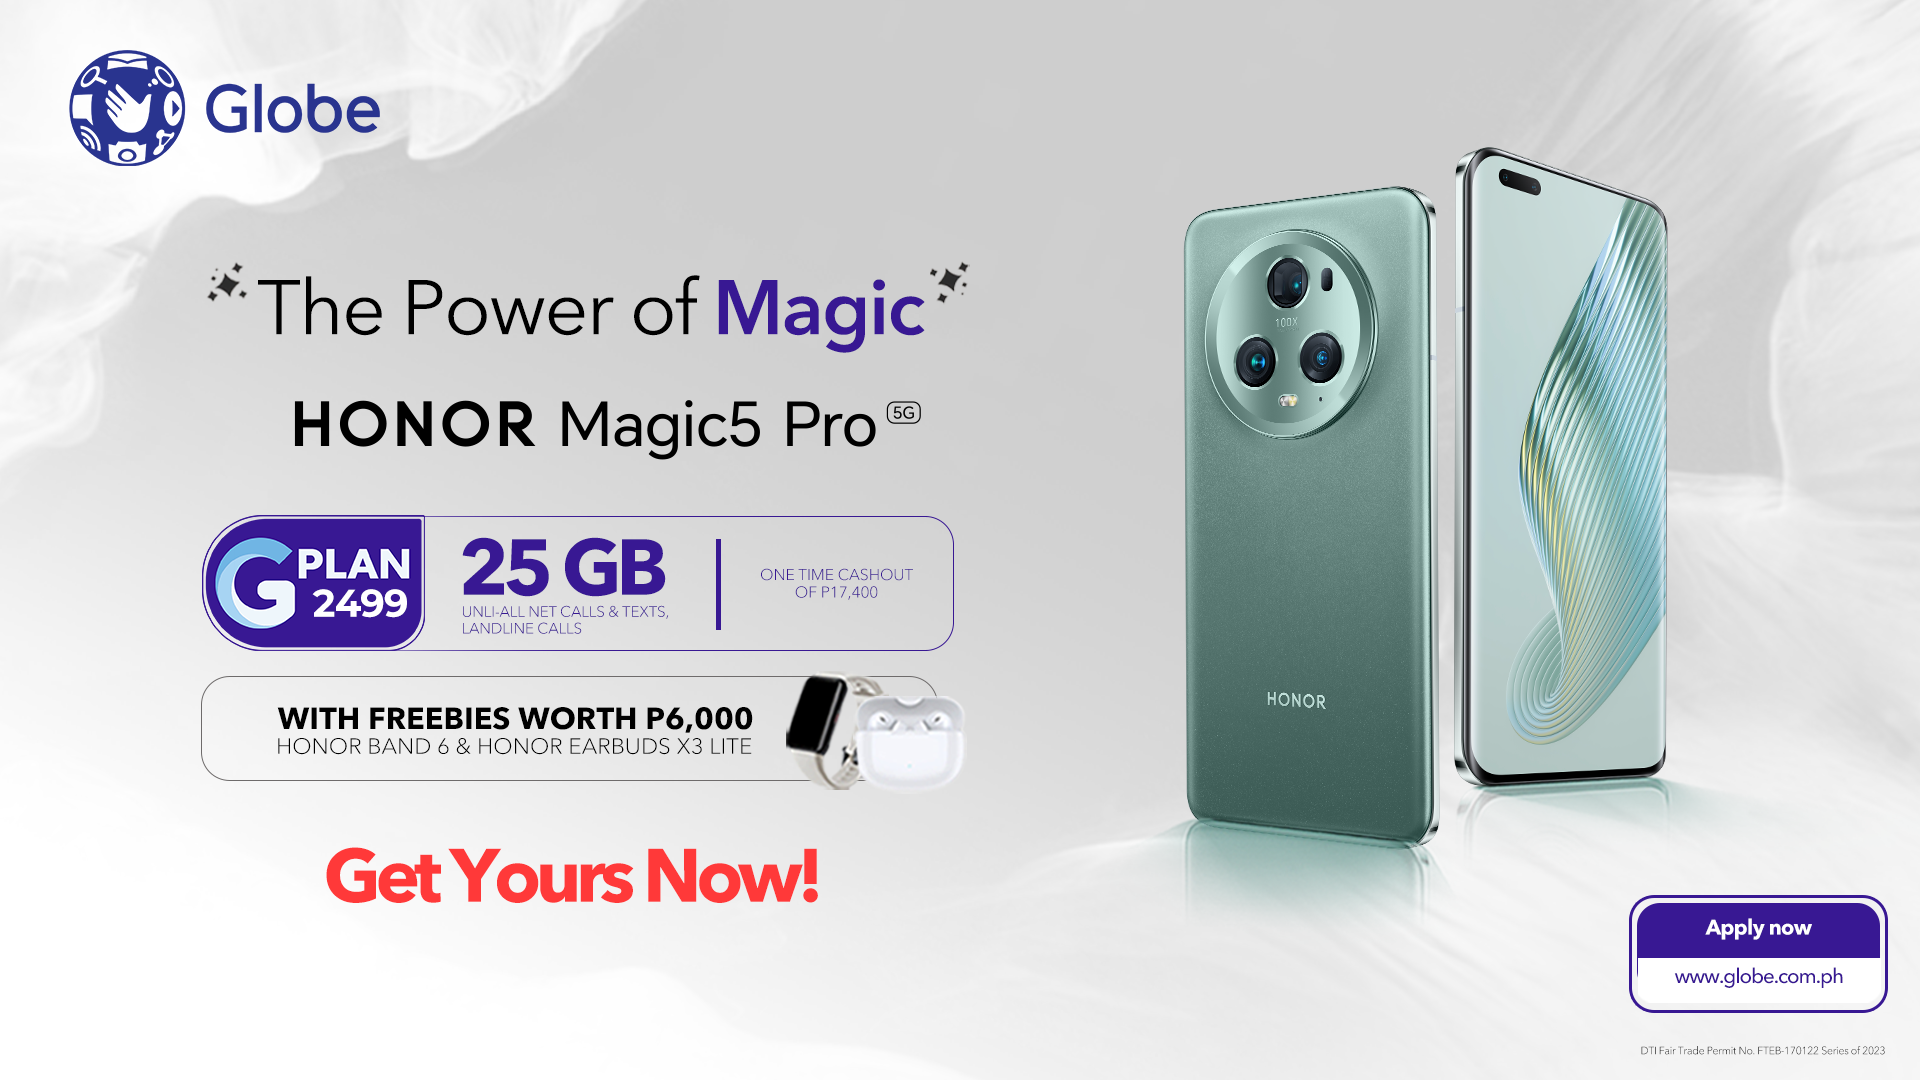 HONOR Magic5 Pro - NOW AVAILABLE